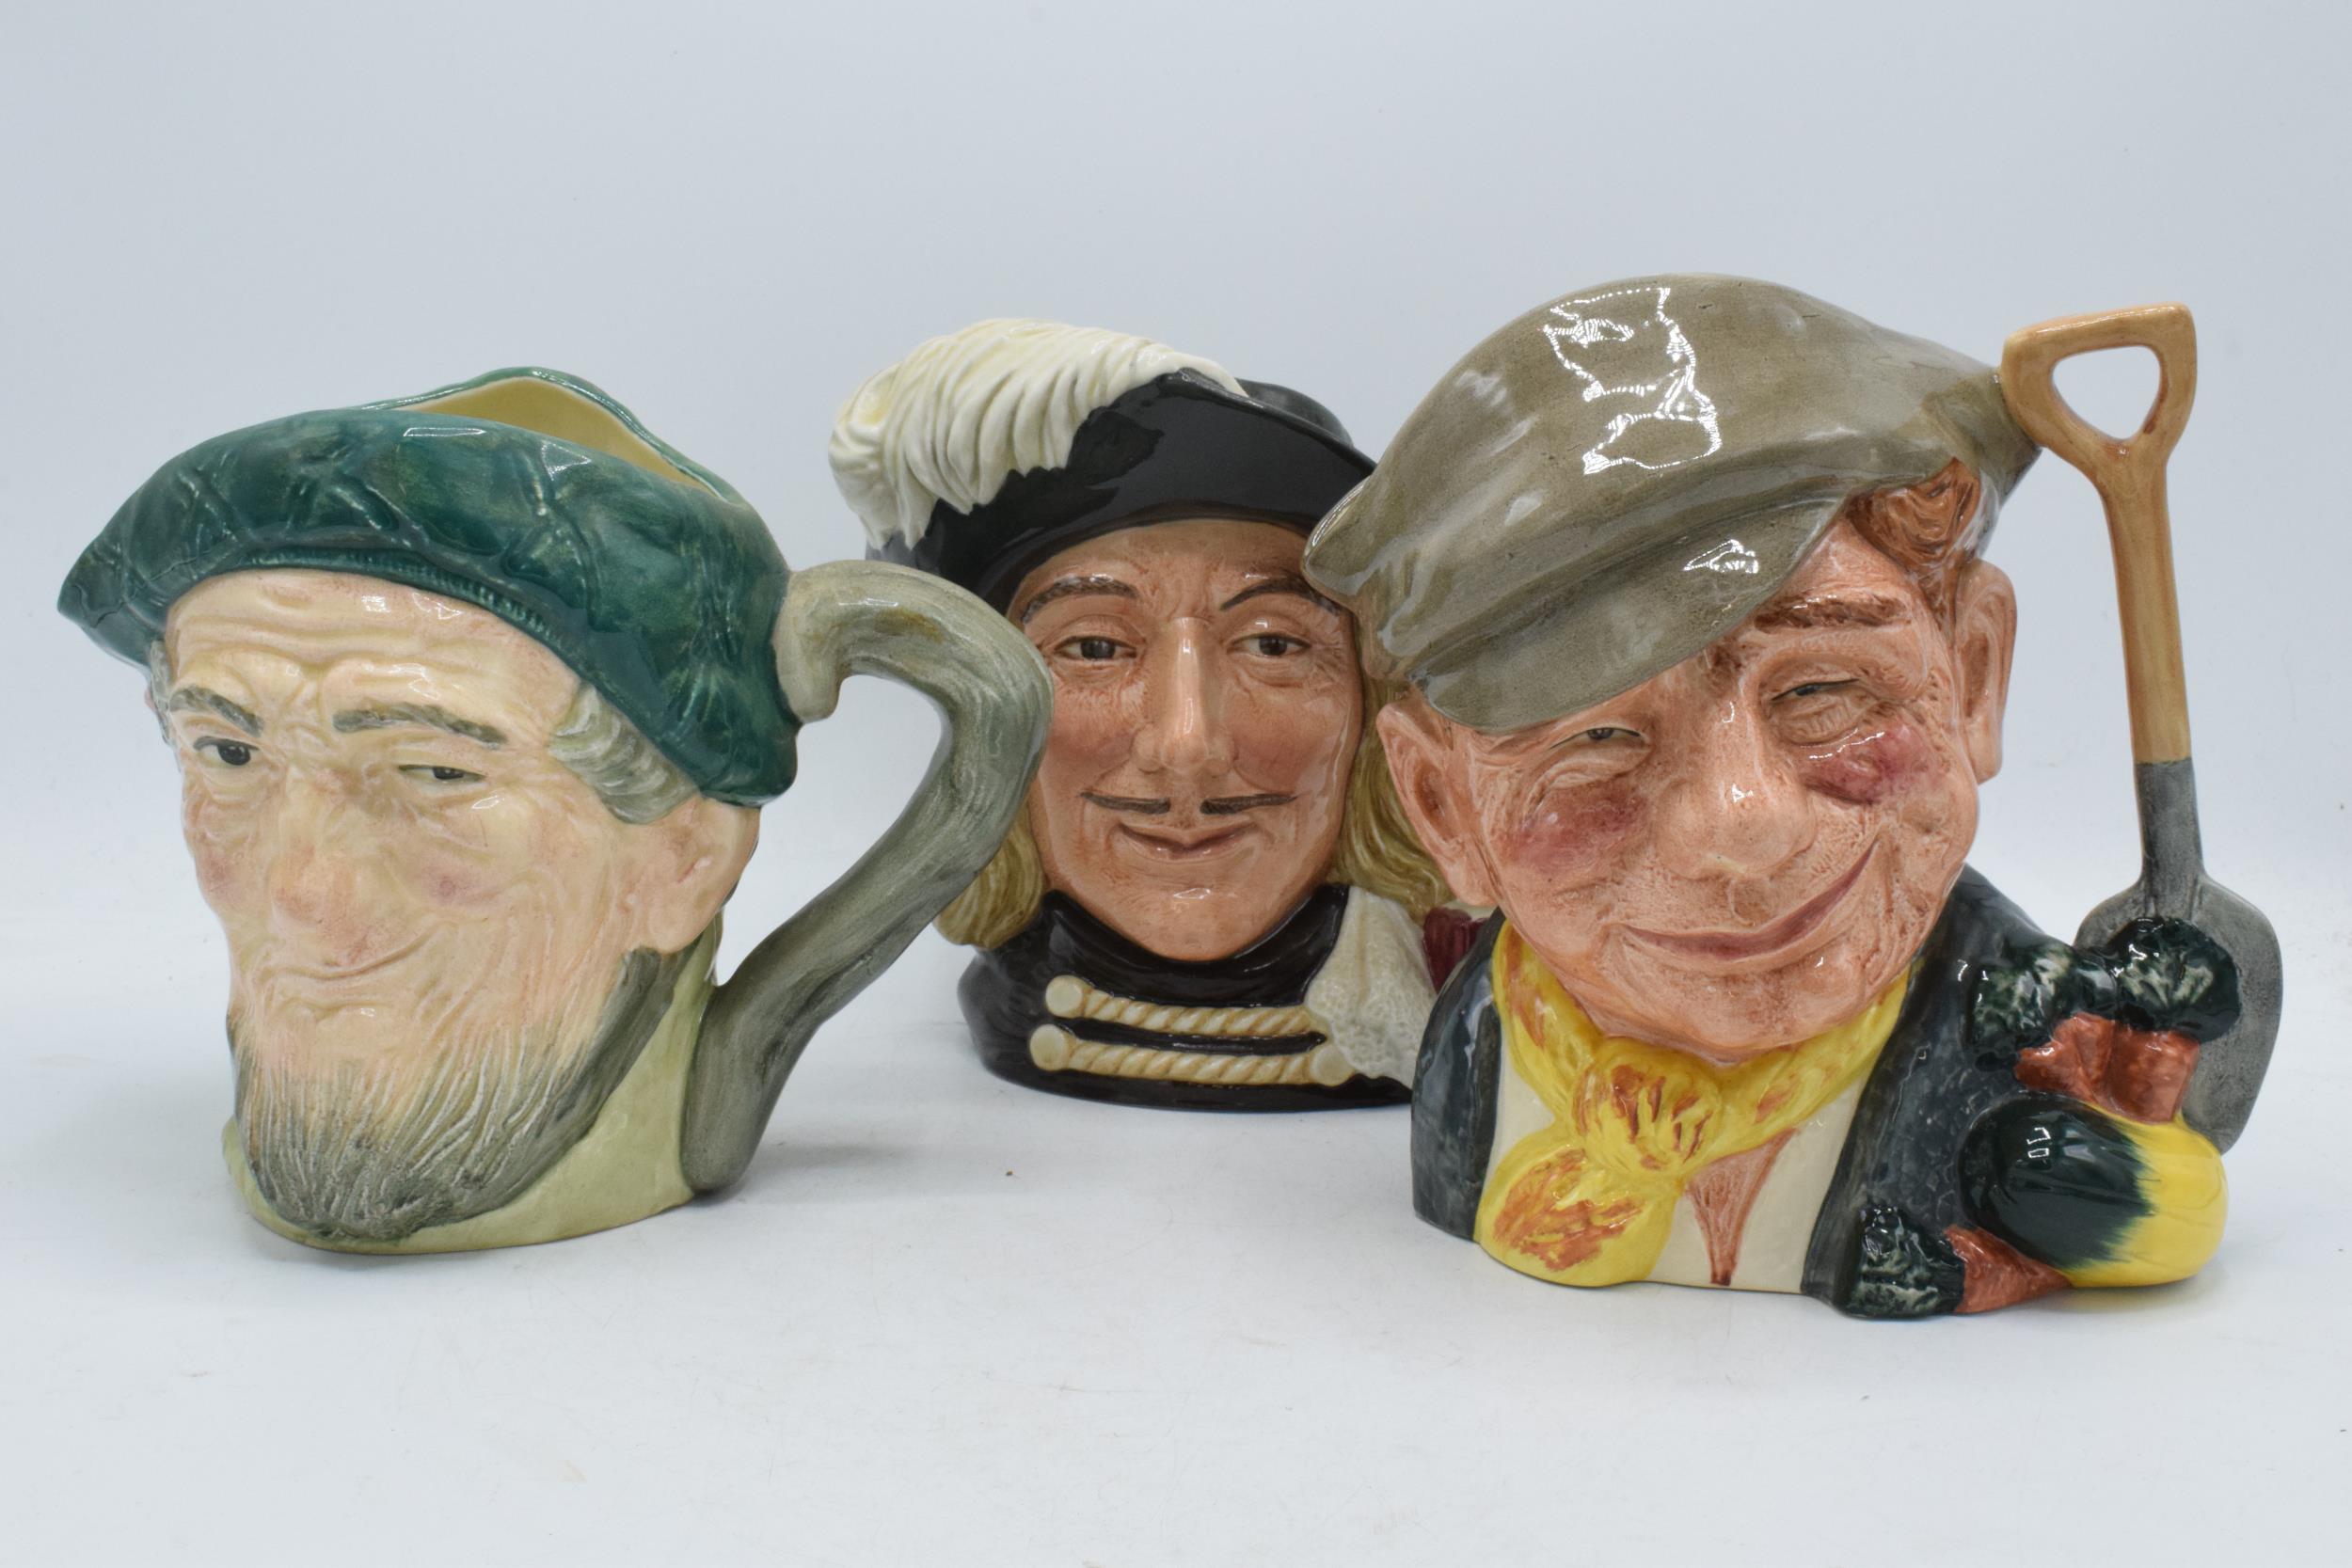 Large Royal Doulton character jugs to include The Gardener D6630, Aramis D6441 and Auld Mac (3).